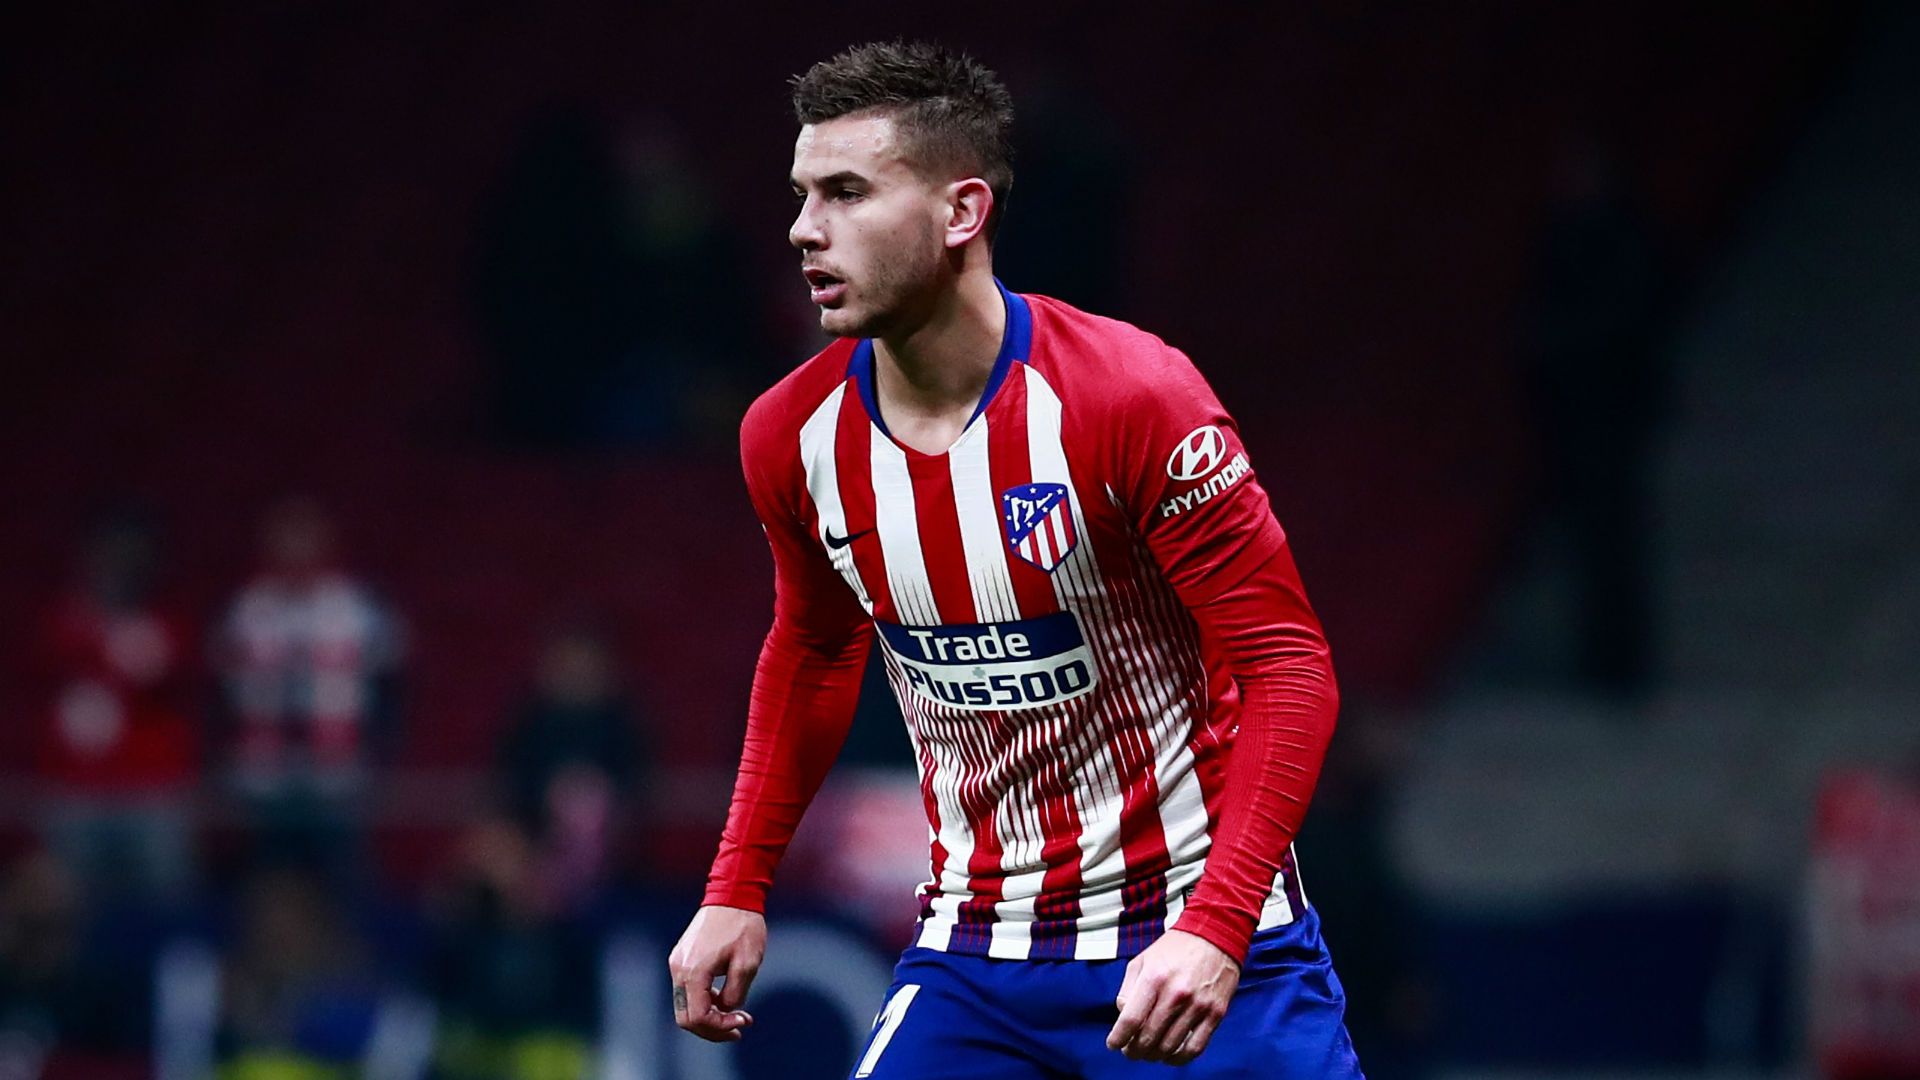 Lucas Hernandez 'wants to continue with Atletico' amid €80m Bayern